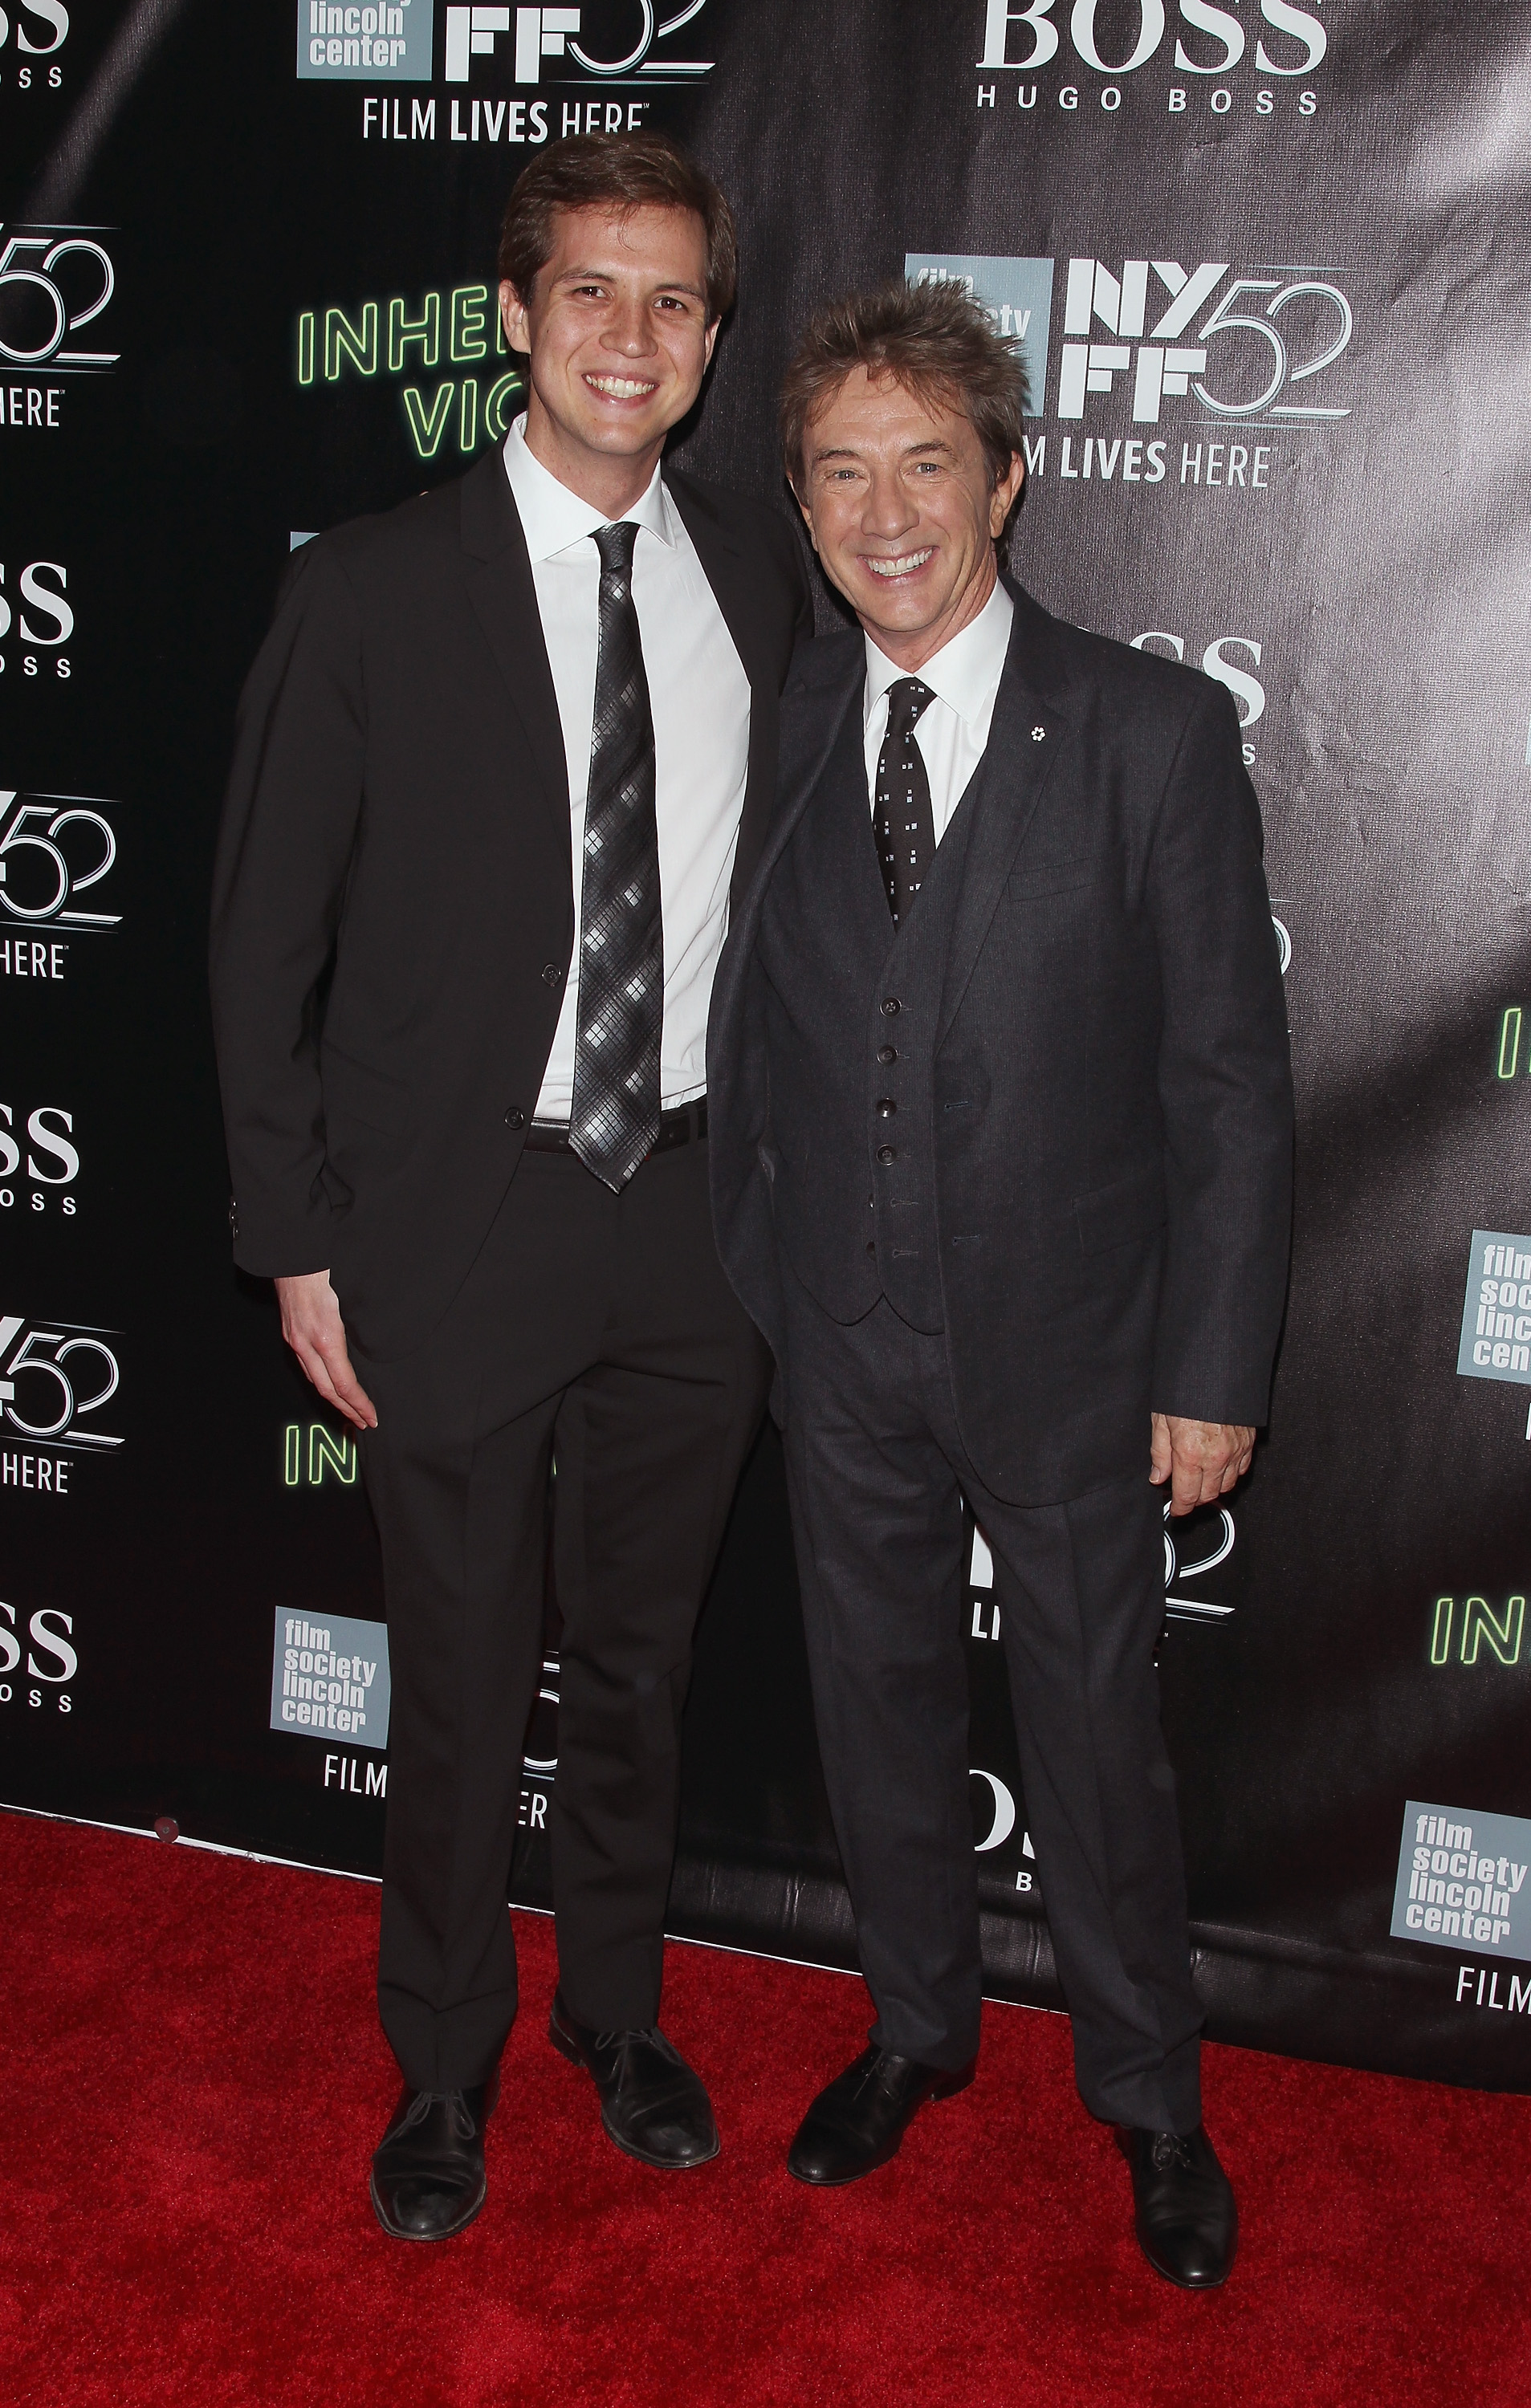 Martin Short and his son Henry Hayter Short attend the "Inherent Vice" Centerpiece Gala Presentation & World Premiere during the 52nd New York Film Festival at Alice Tully Hall on October 4, 2014, in New York City. | Source: Getty Images